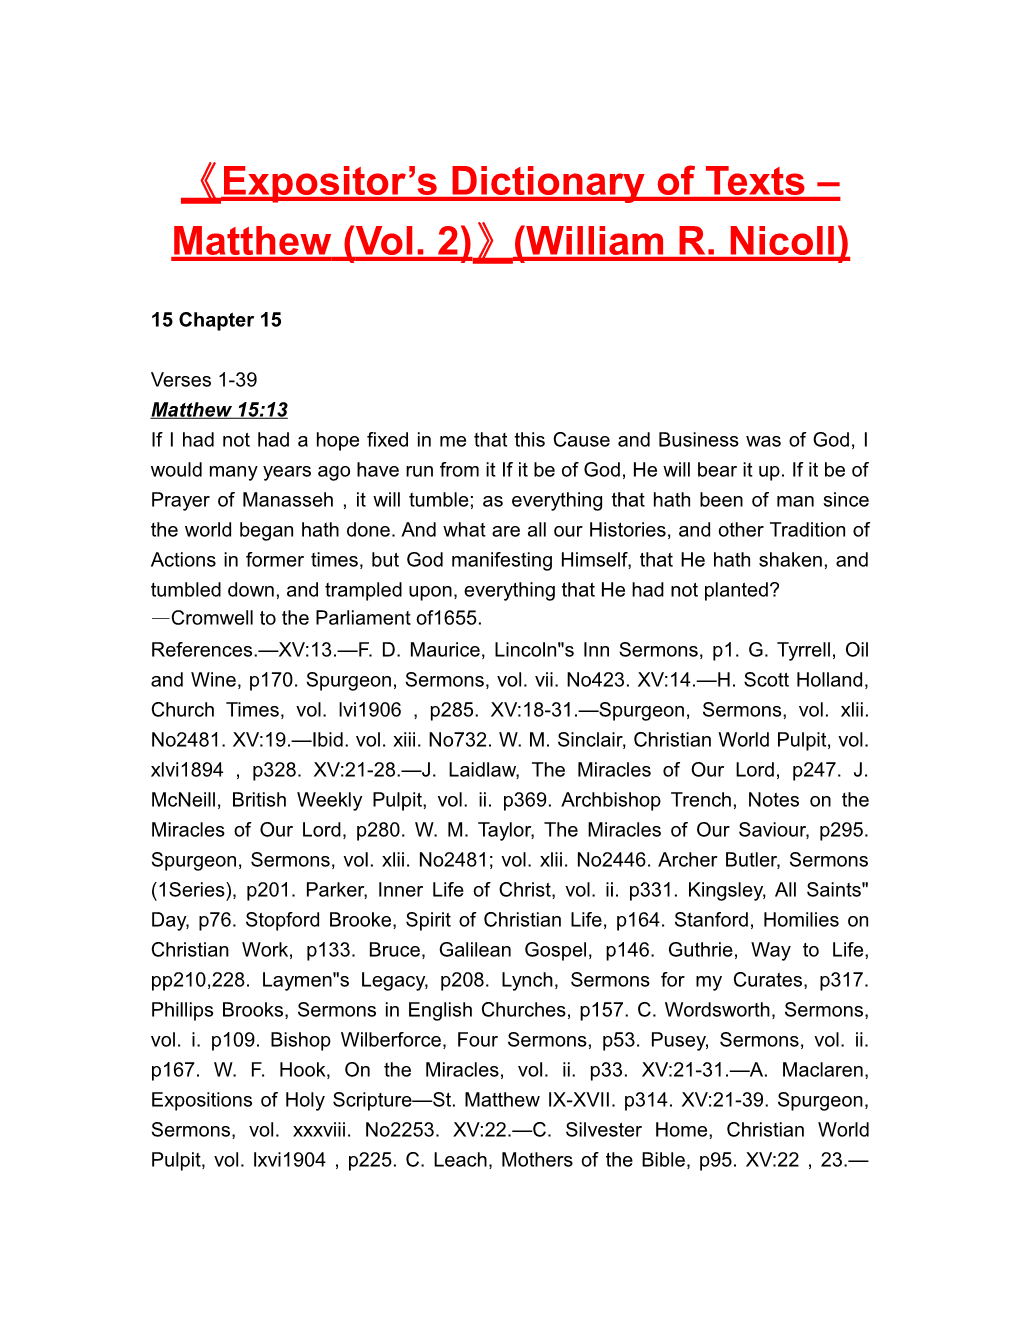 Expositor S Dictionary of Texts Matthew (Vol. 2) (William R. Nicoll)